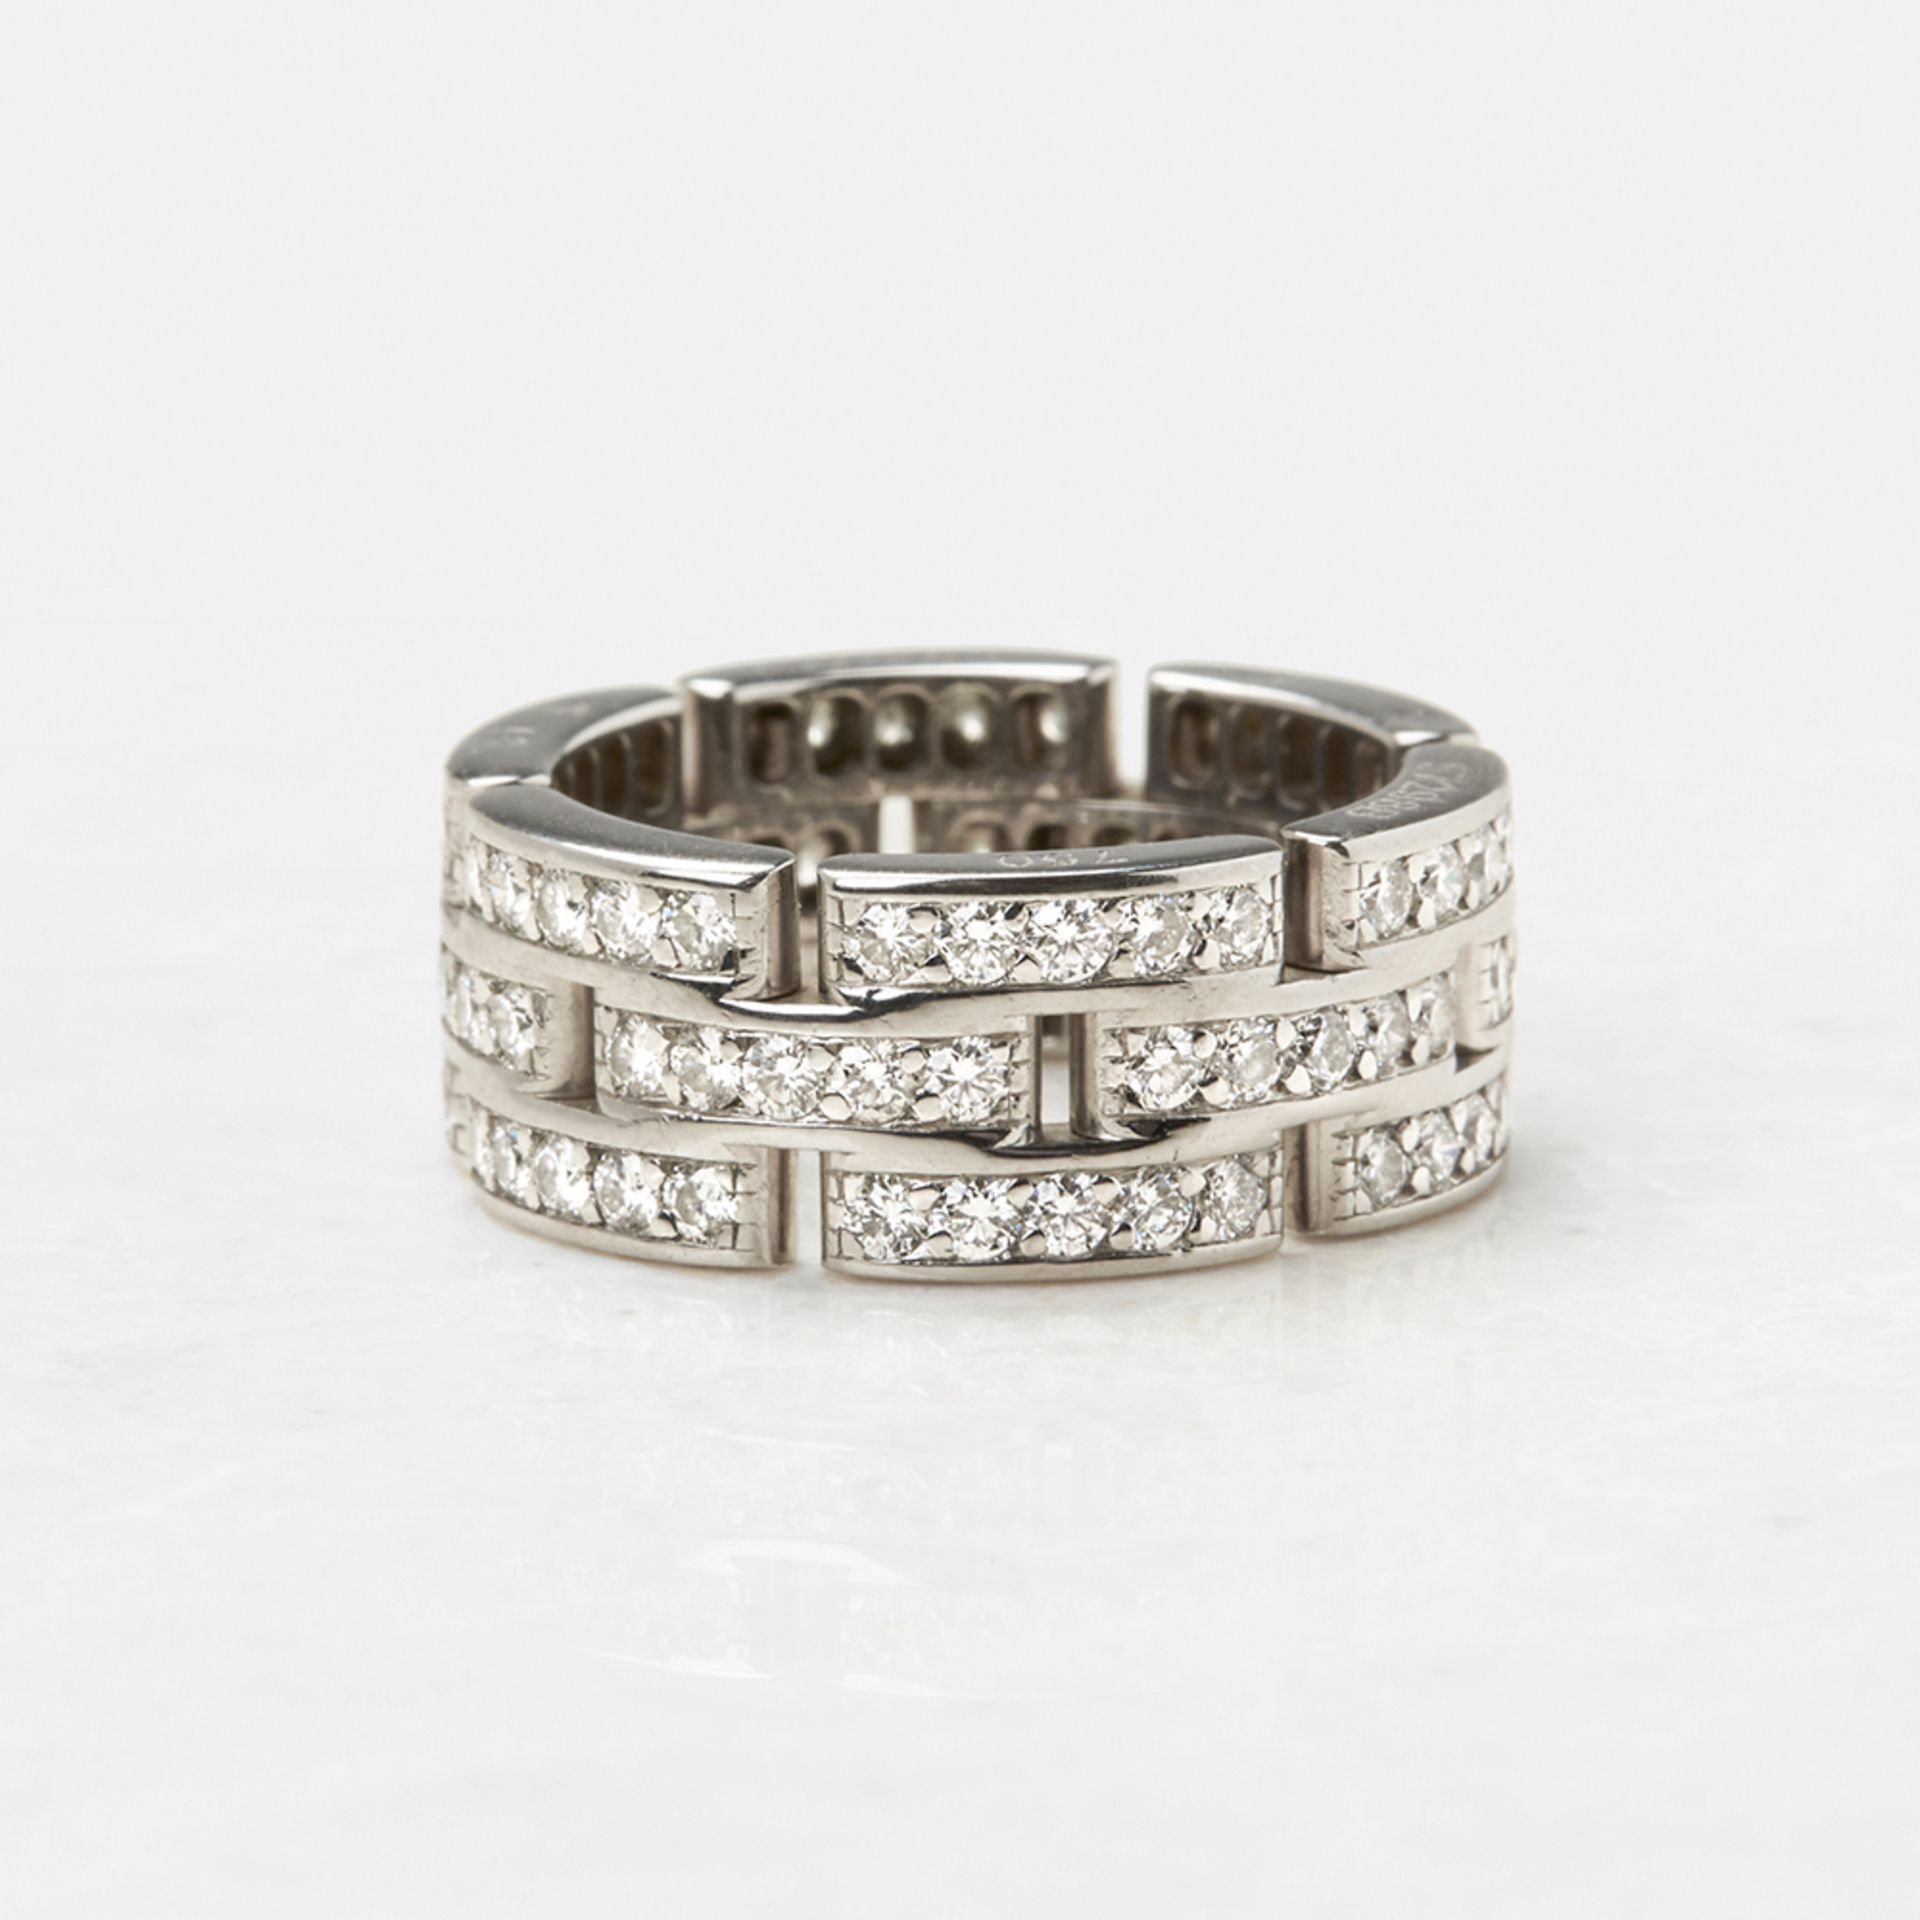 Cartier 18k White Gold Diamond Maillon Ring - Image 2 of 8